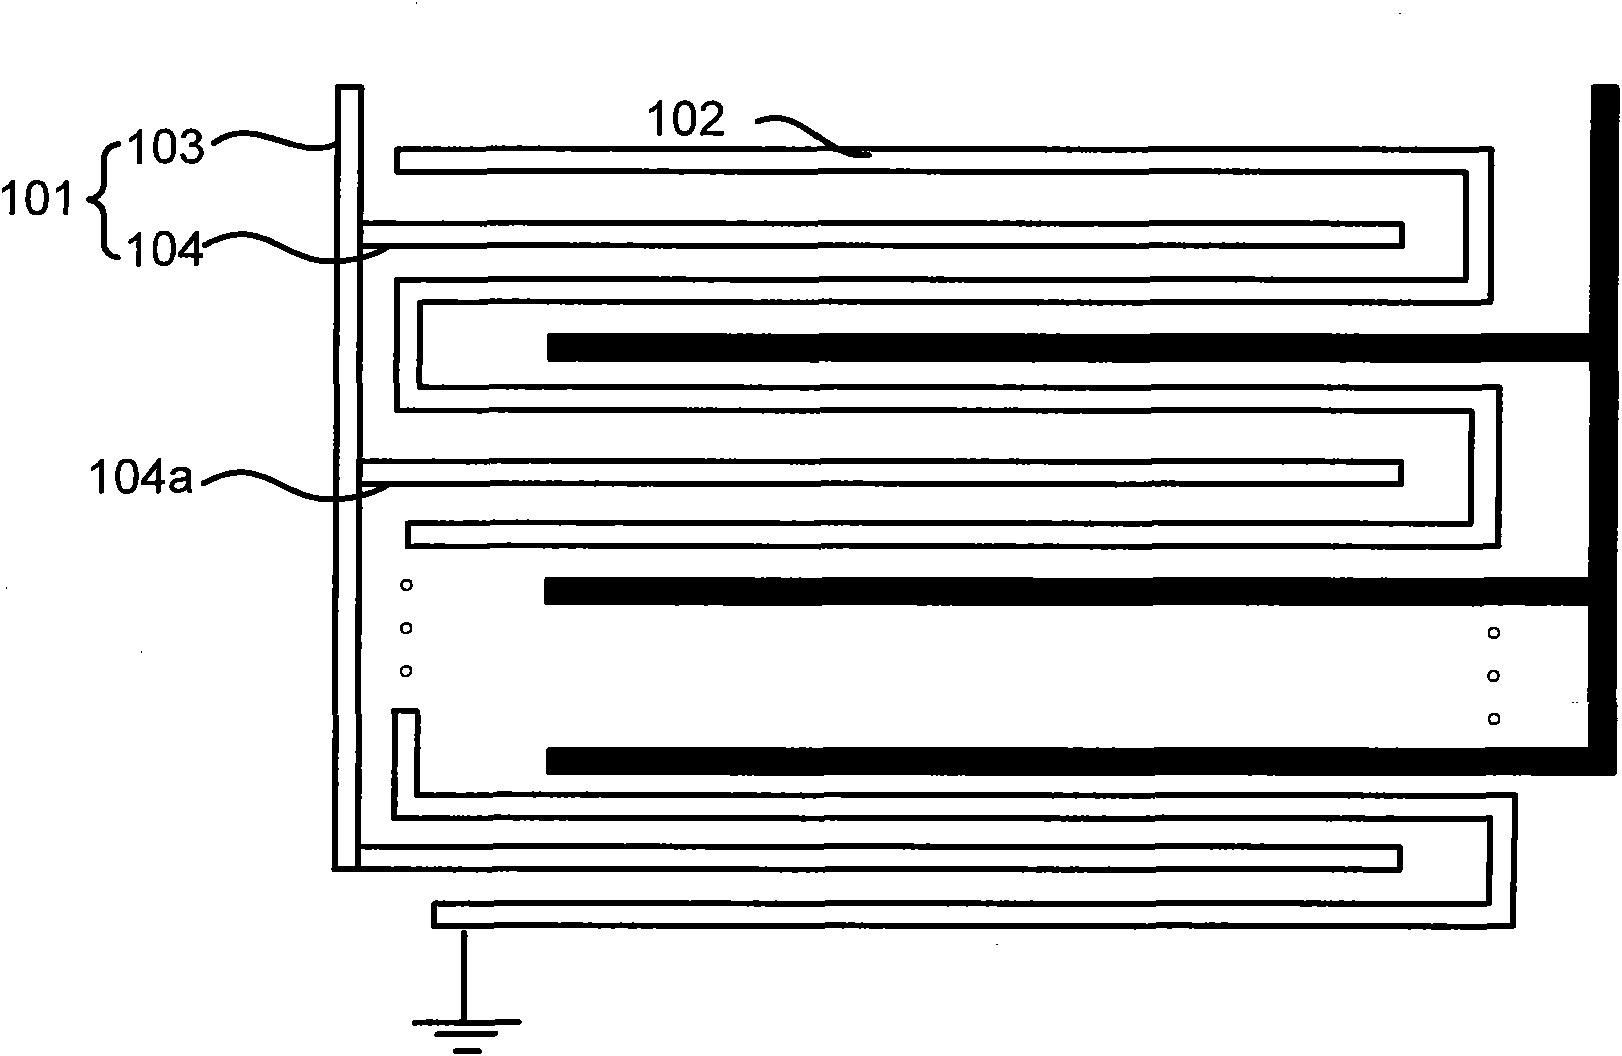 Structure of semiconductor device